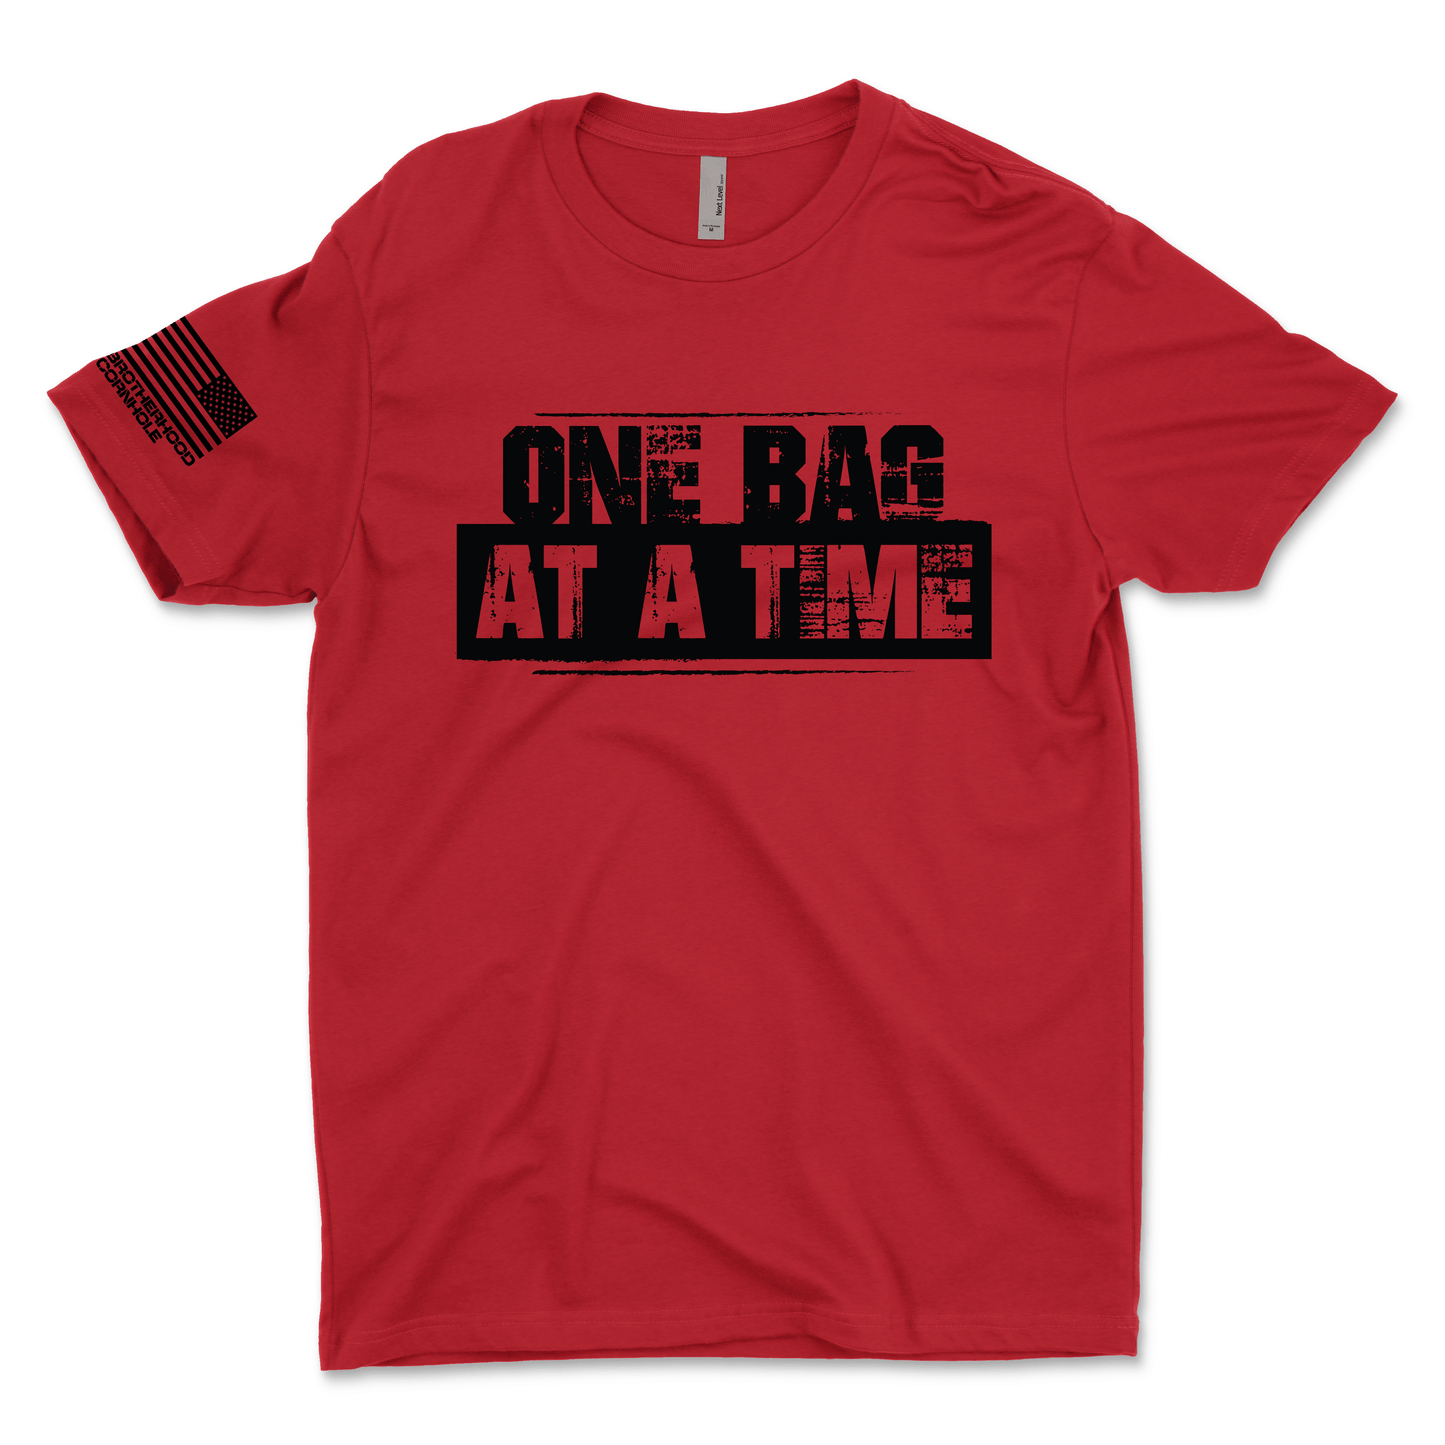 Men's "One Bag at a Time" T-Shirt